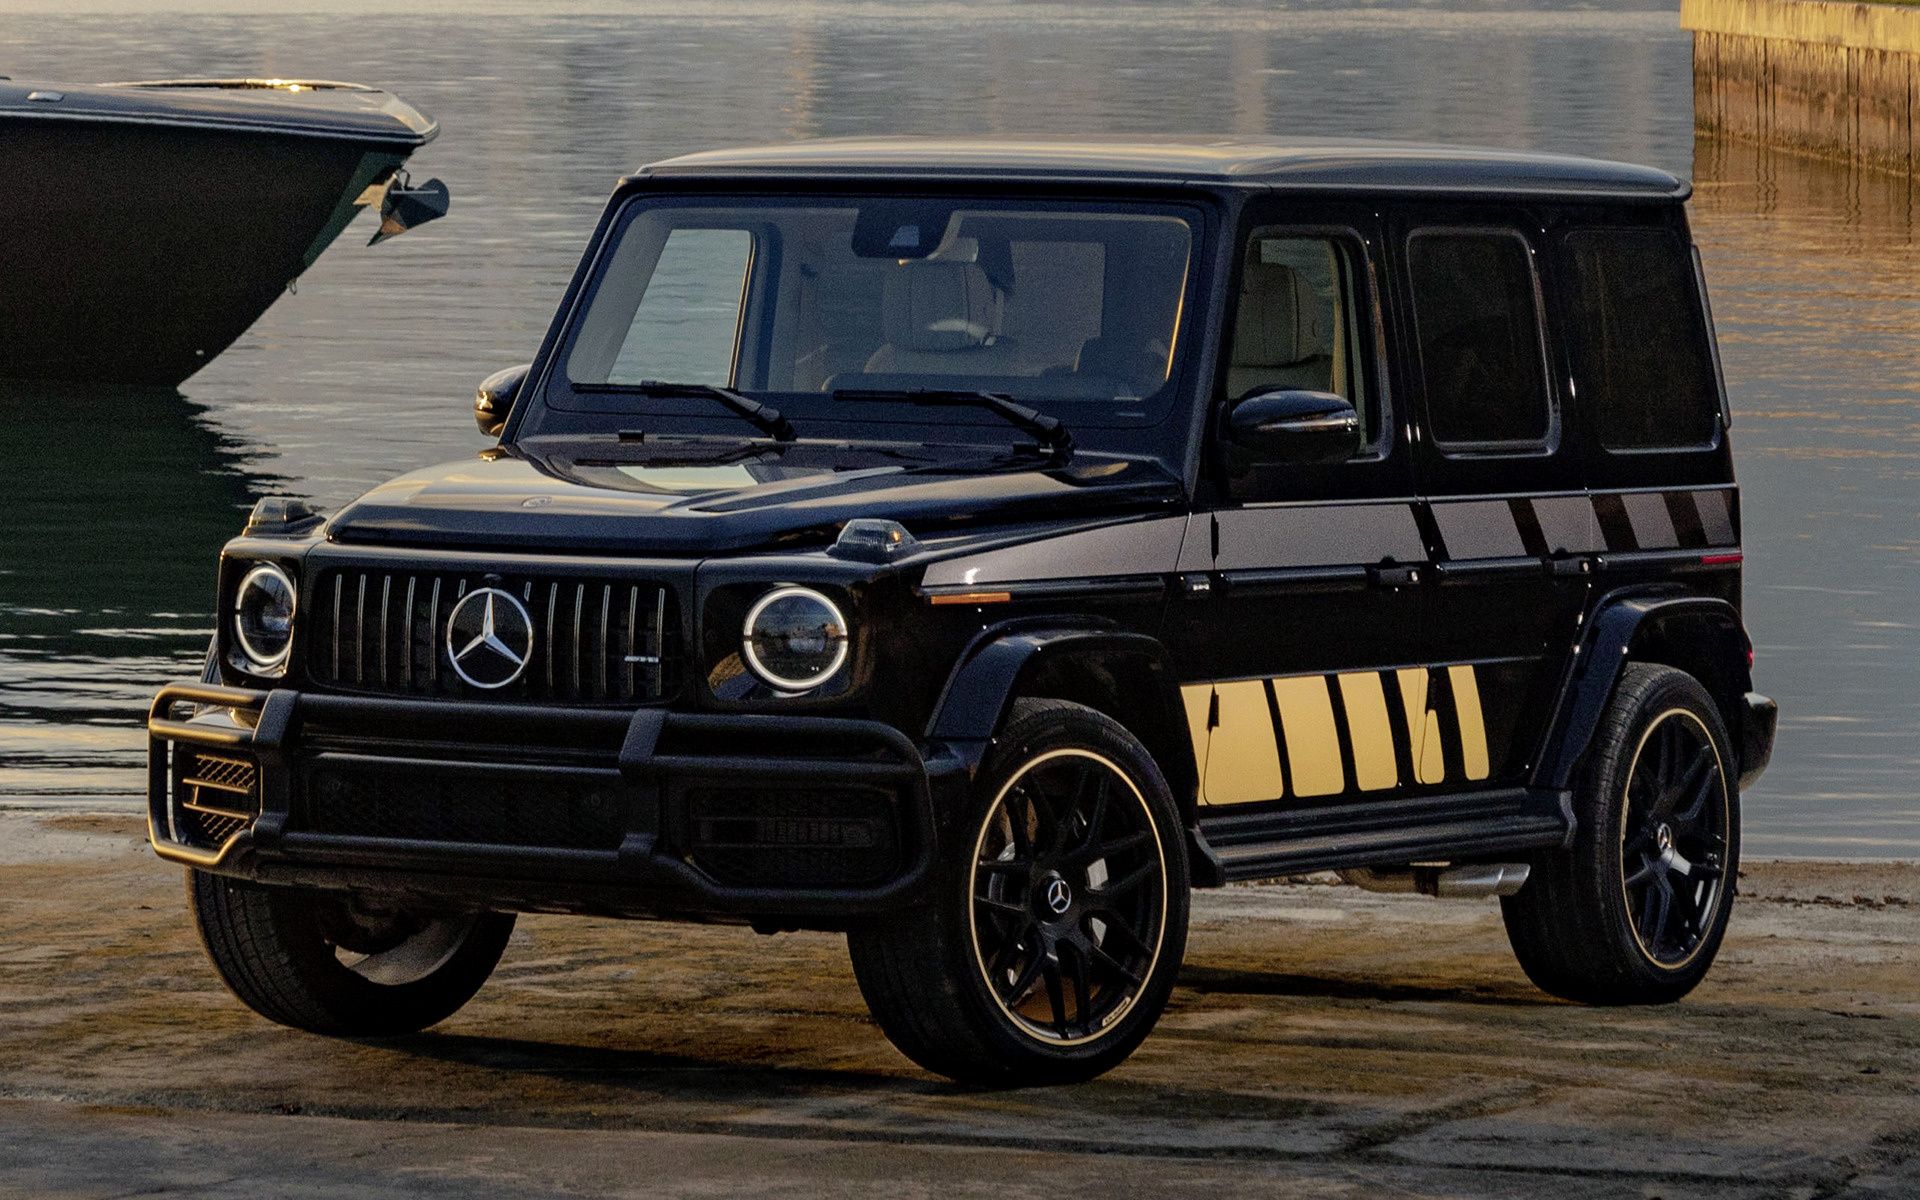 Mercedes AMG G 63 Cigarette Edition (US) And HD Image